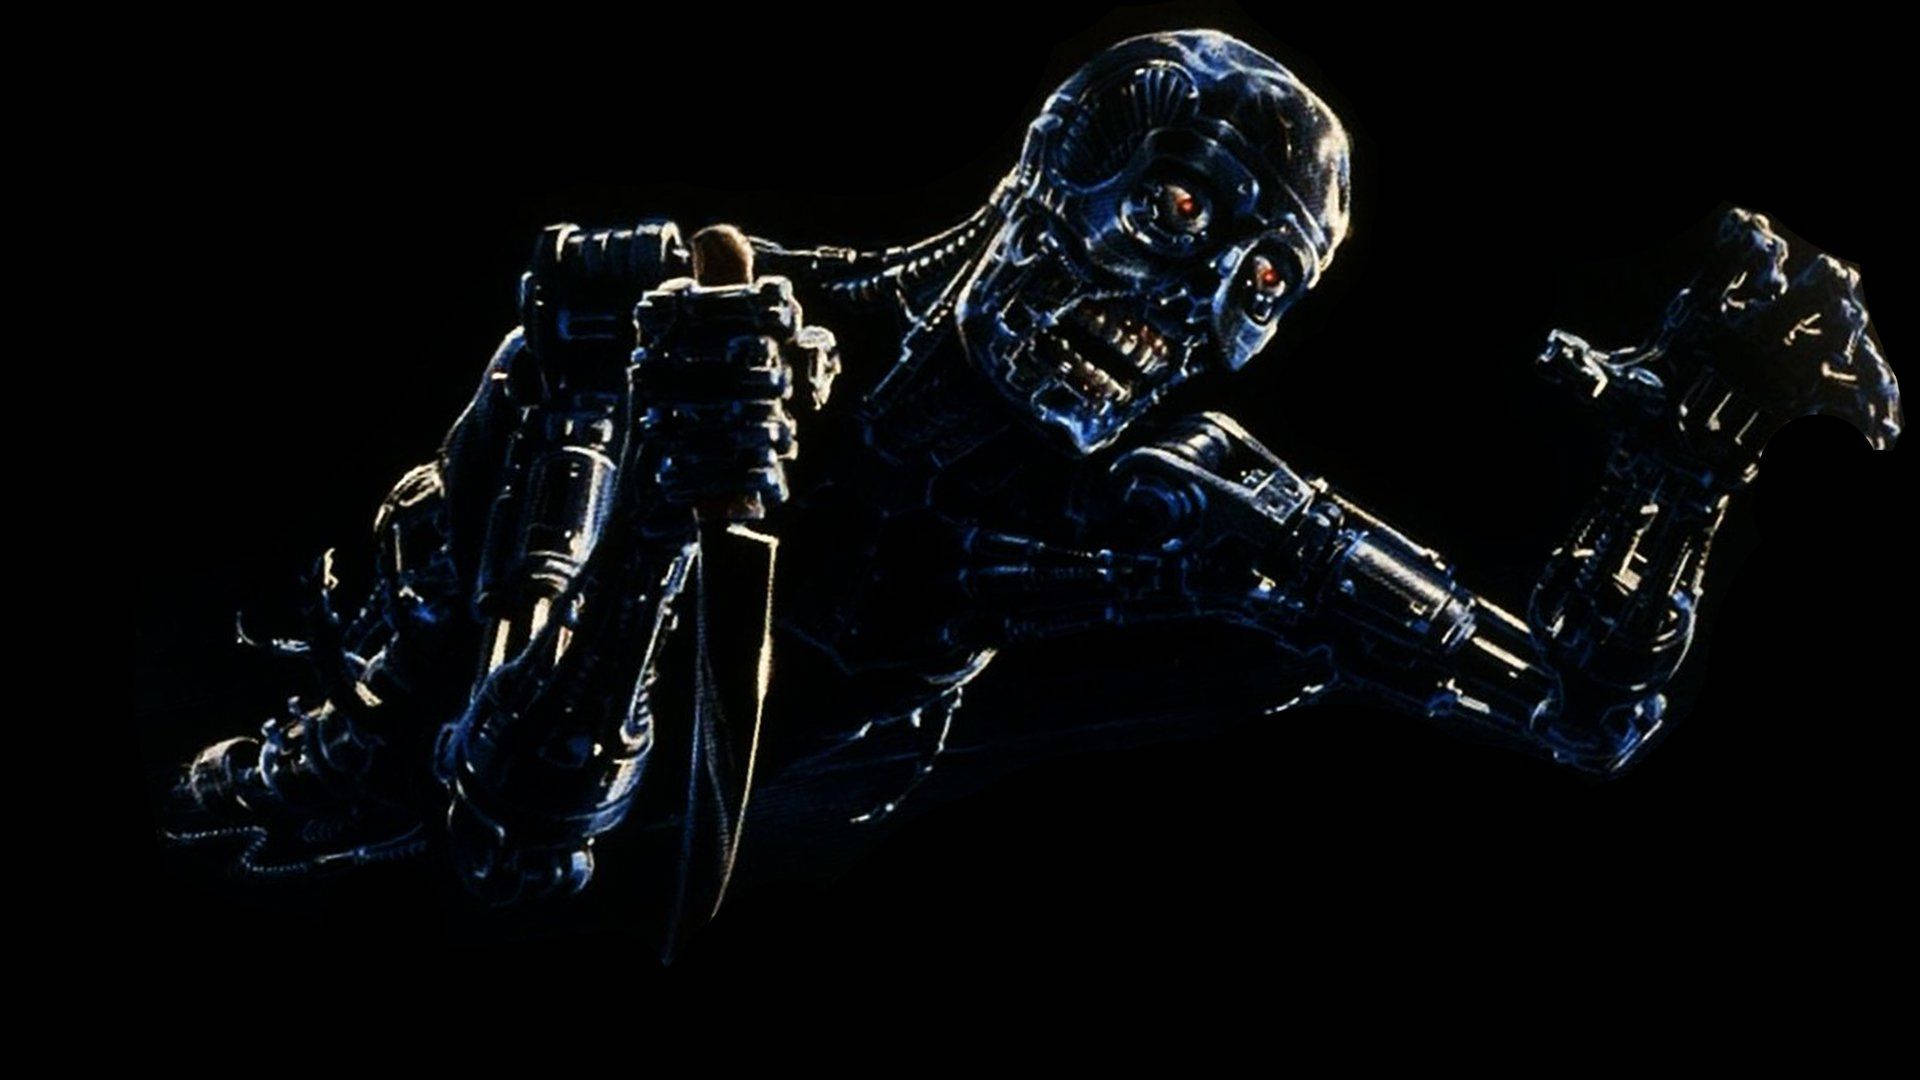 Terminator 1920X1080 Wallpaper and Background Image